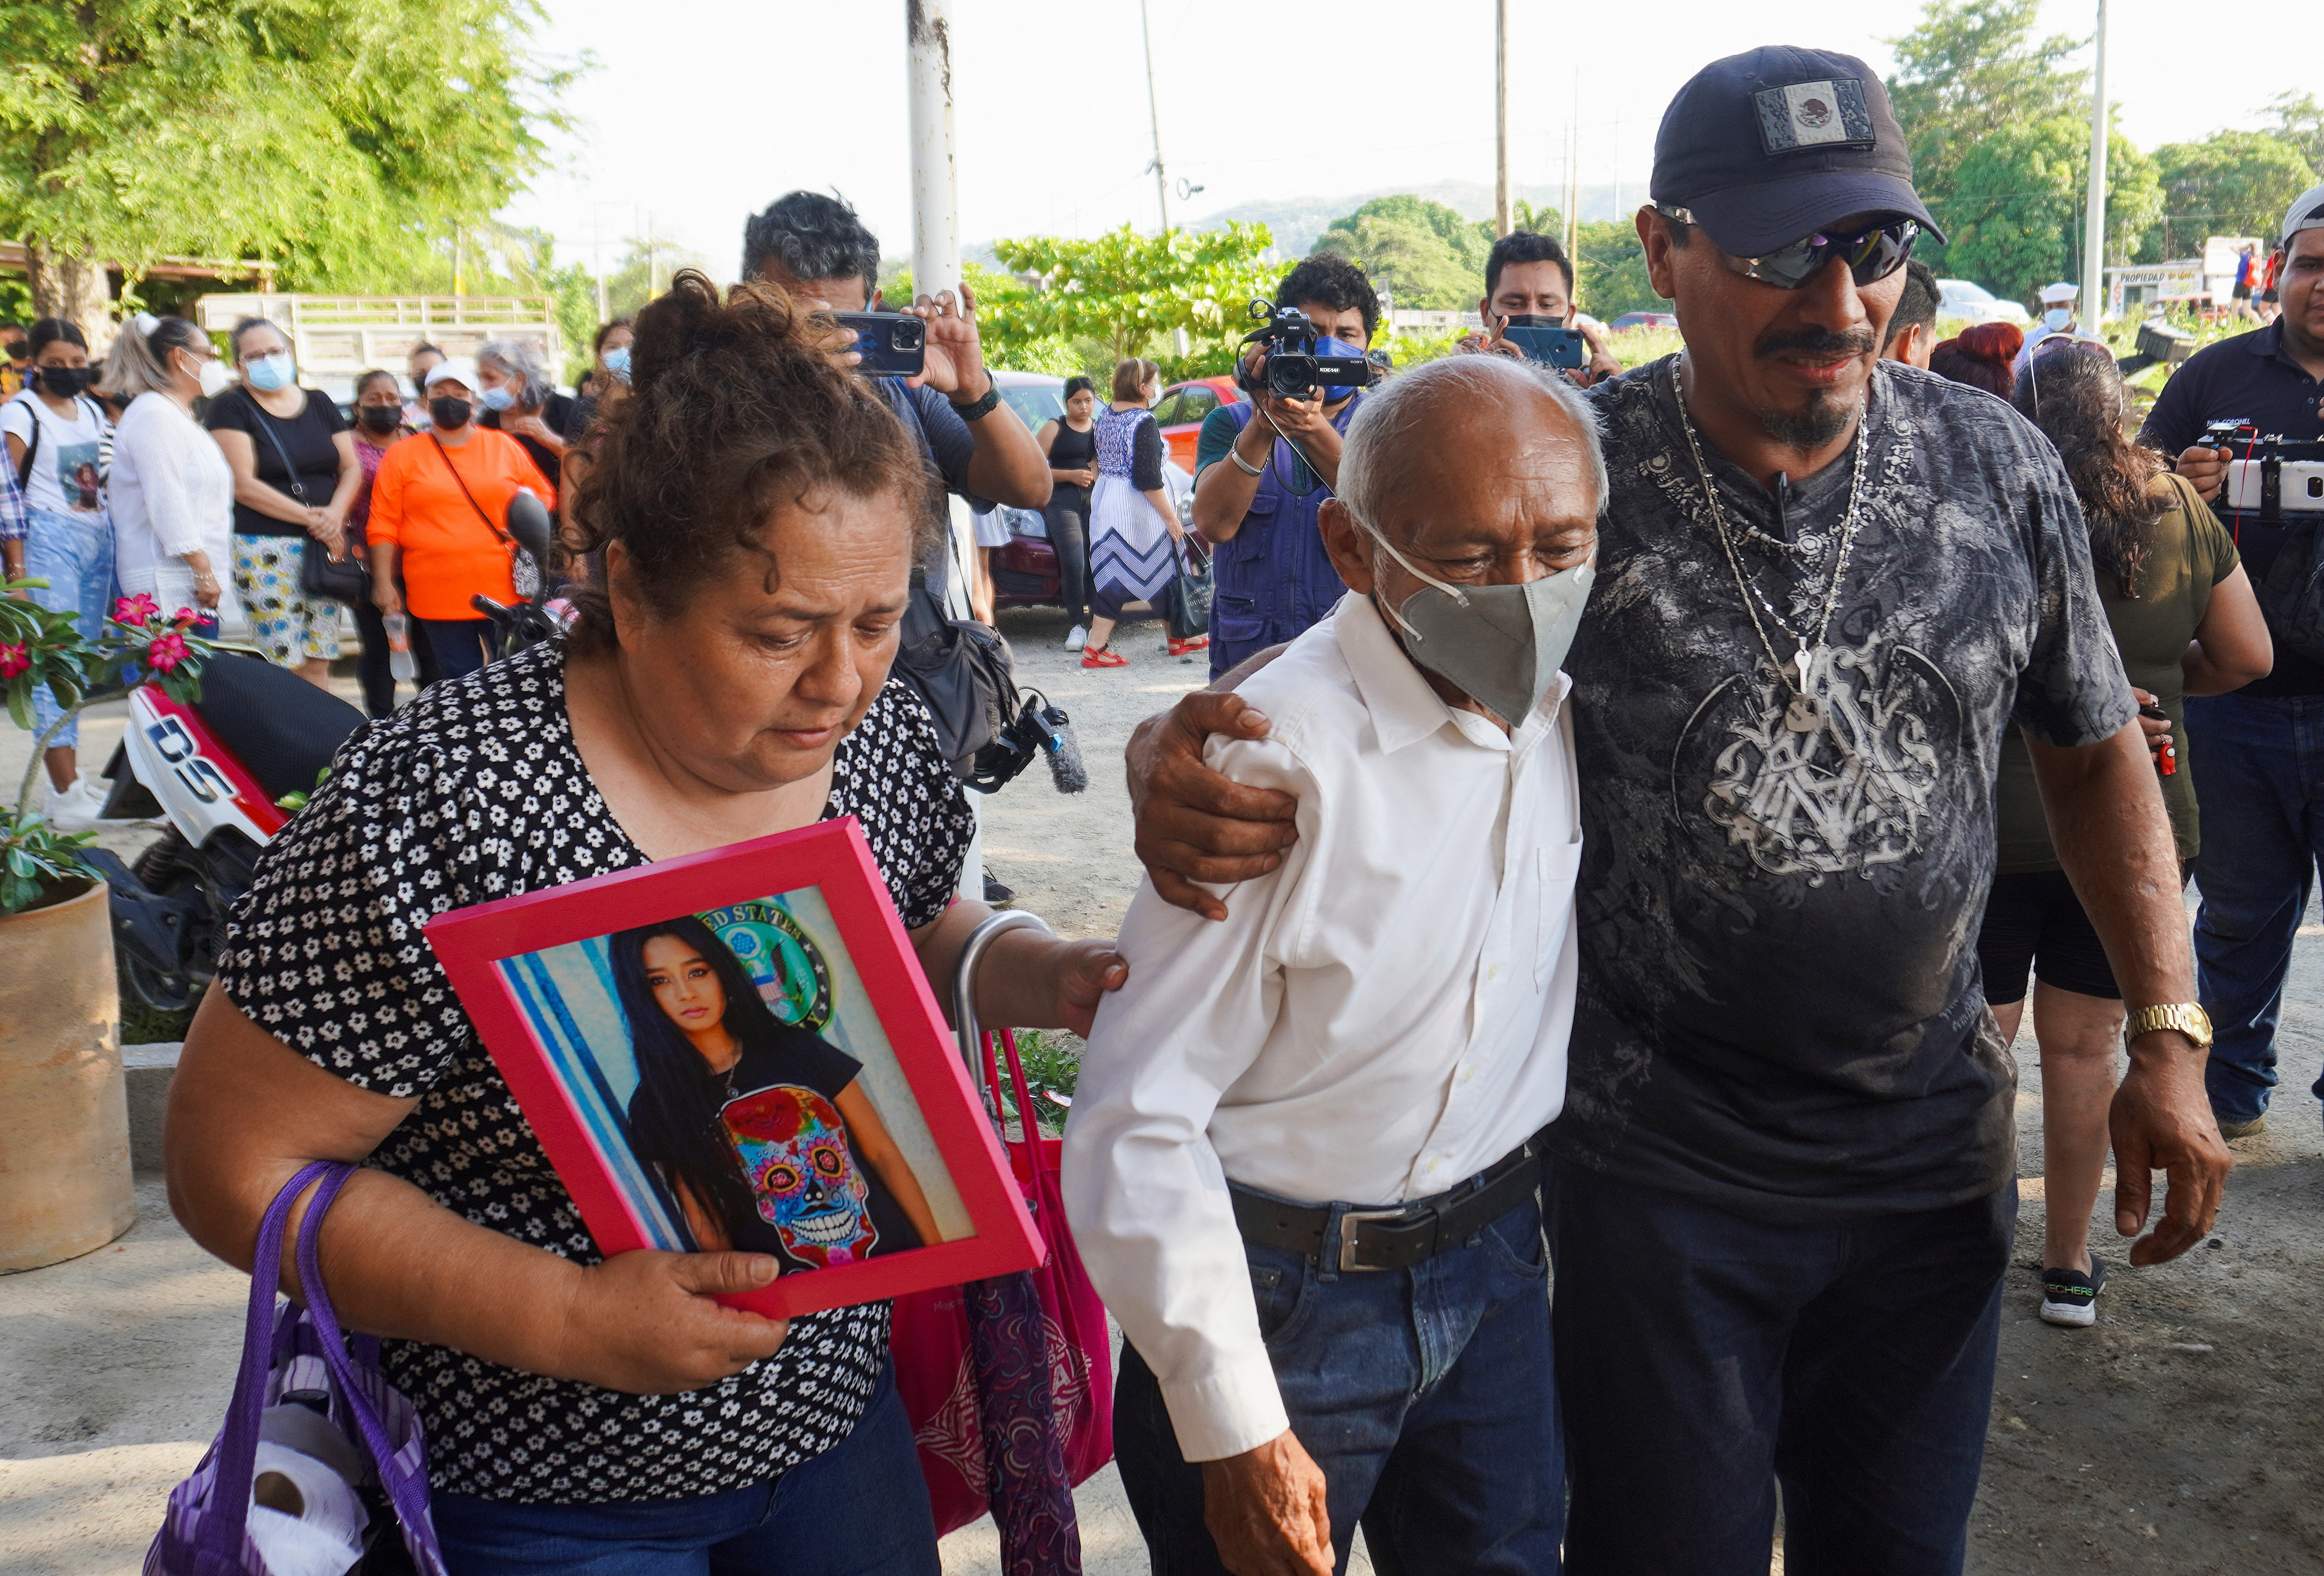 Jose Luis Hay at the funeral of his daughter, accompanied by other relatives (Photo: REUTERS/Rusvel Rasgado)